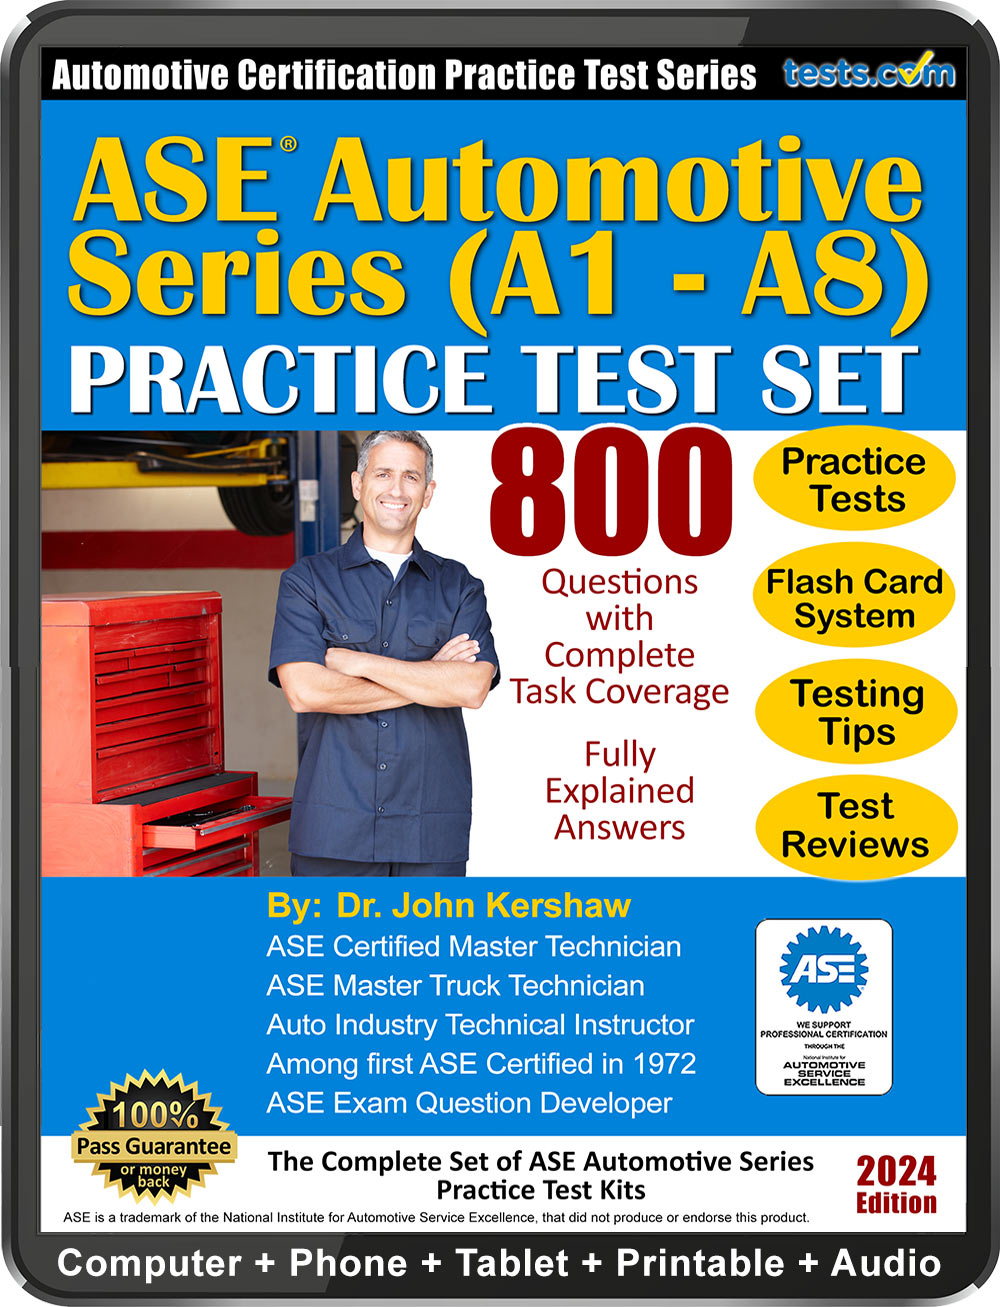 ASE Automotive Certification Series Practice Tests